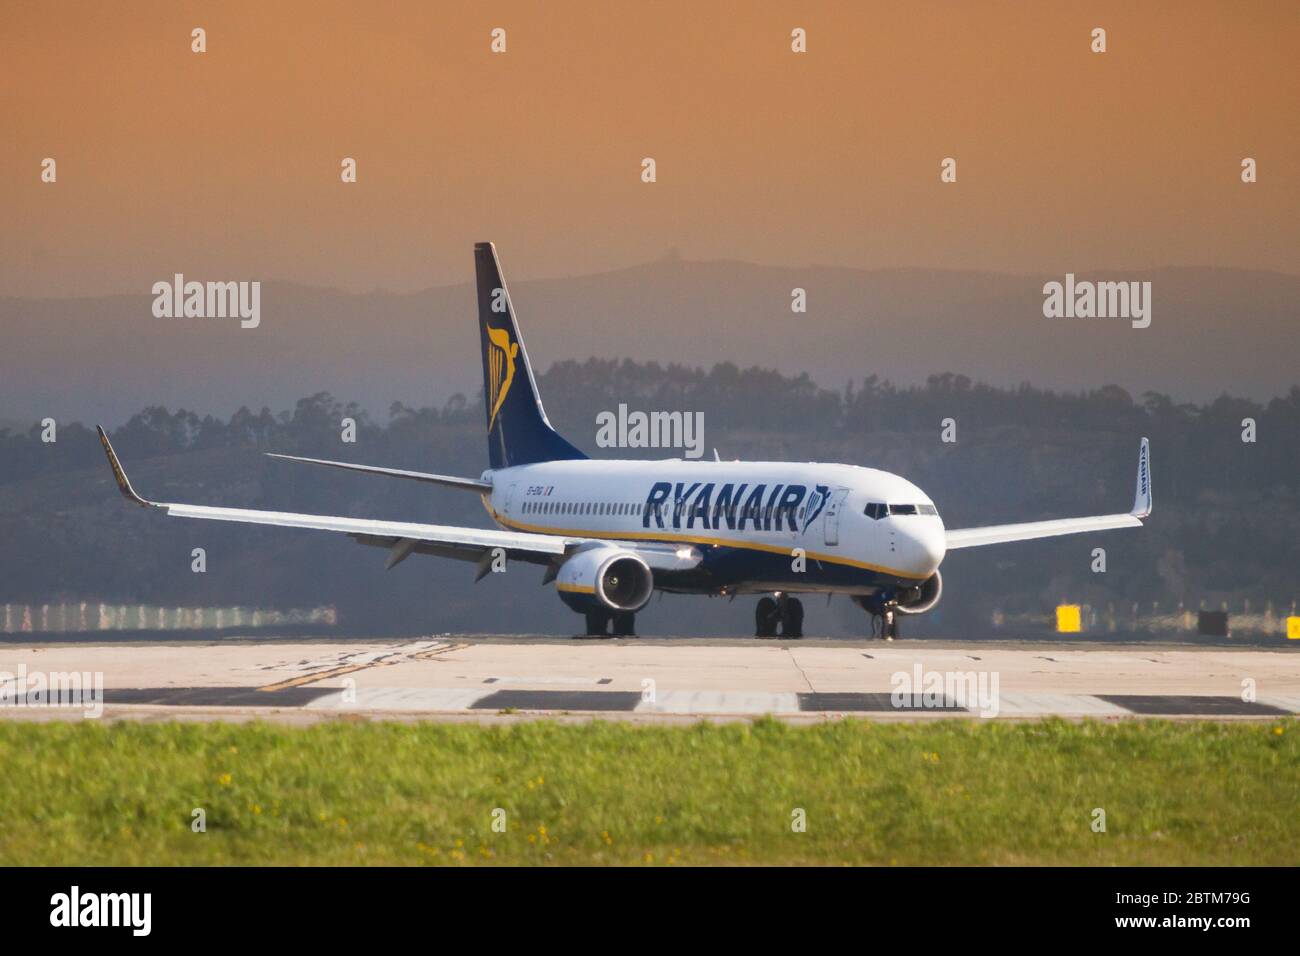 Seve Ballesteros airport, Santander, Spain - 12 March, 2018: Ryanair Boing 737 on the landing strip. The airline Ryanair offers flights from Santander Stock Photo